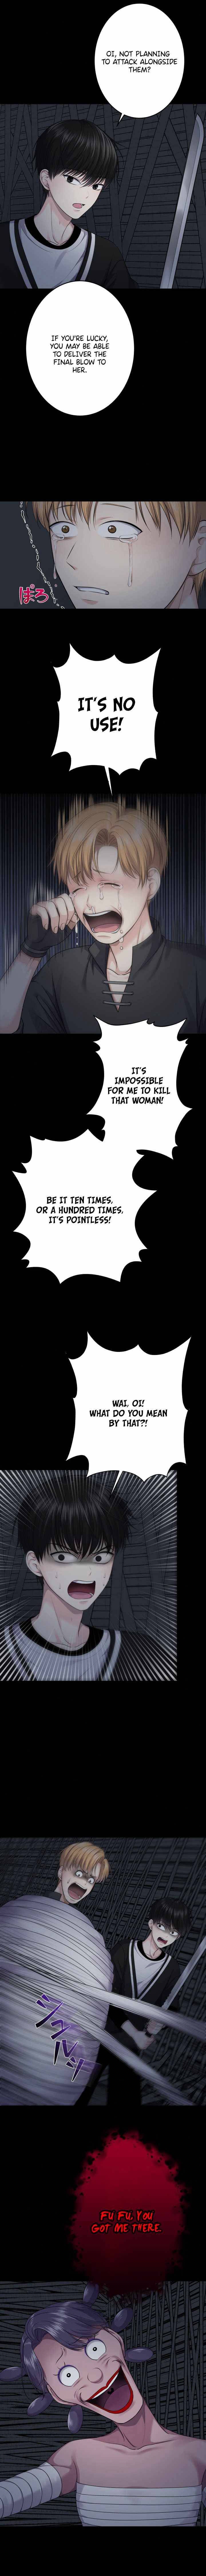 The Absolute God’s Game Chapter 15 page 13